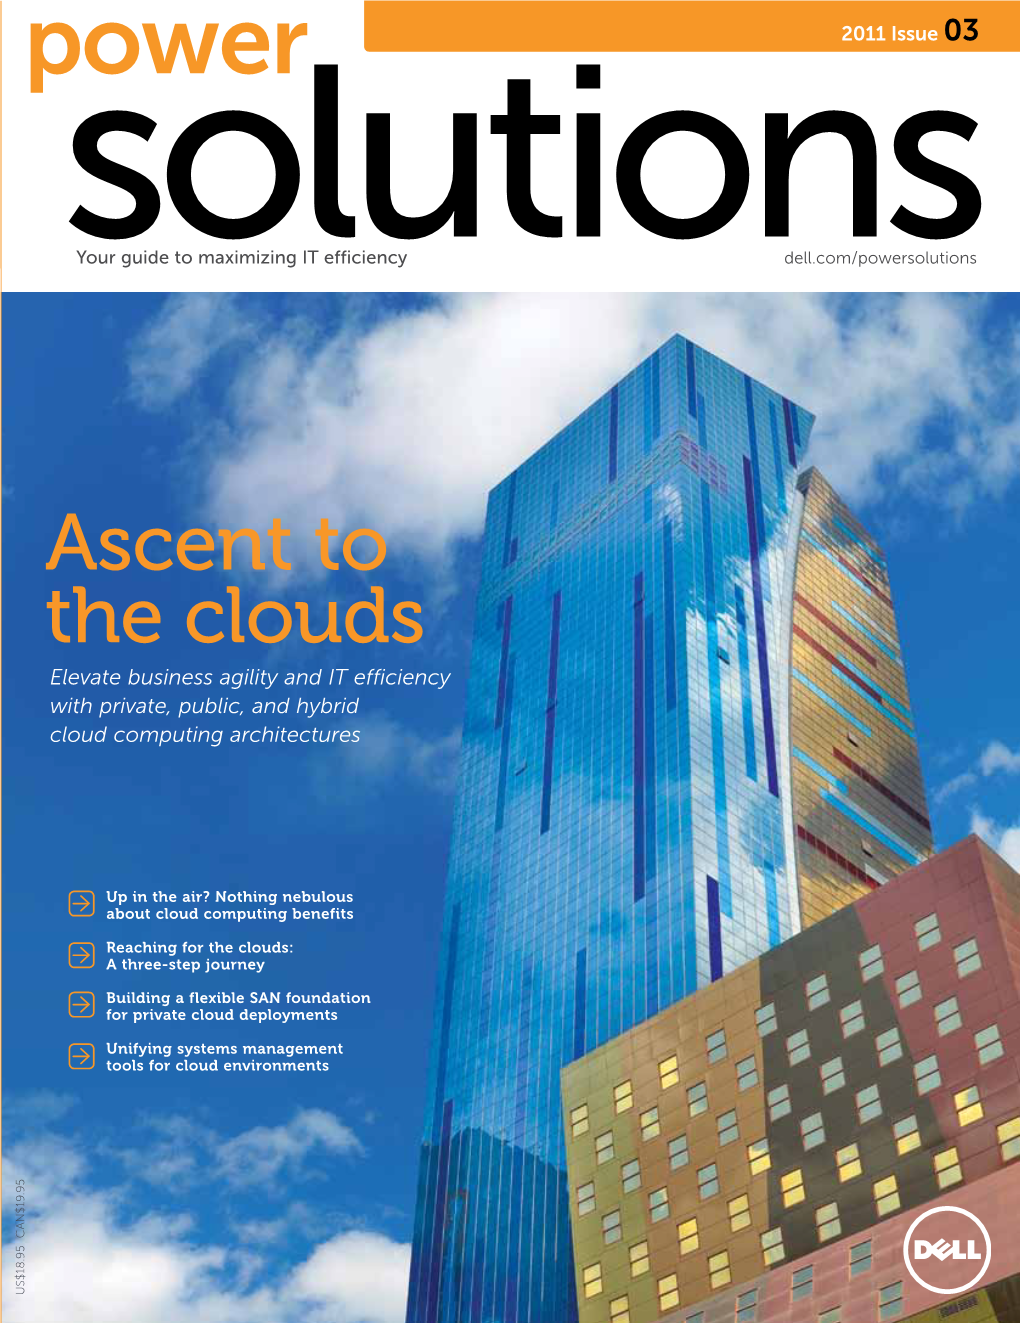 Ascent to the Clouds the Clouds Elevate Business Agility and IT Efficiency with Private, Public, and Hybrid Cloud Computing Architectures